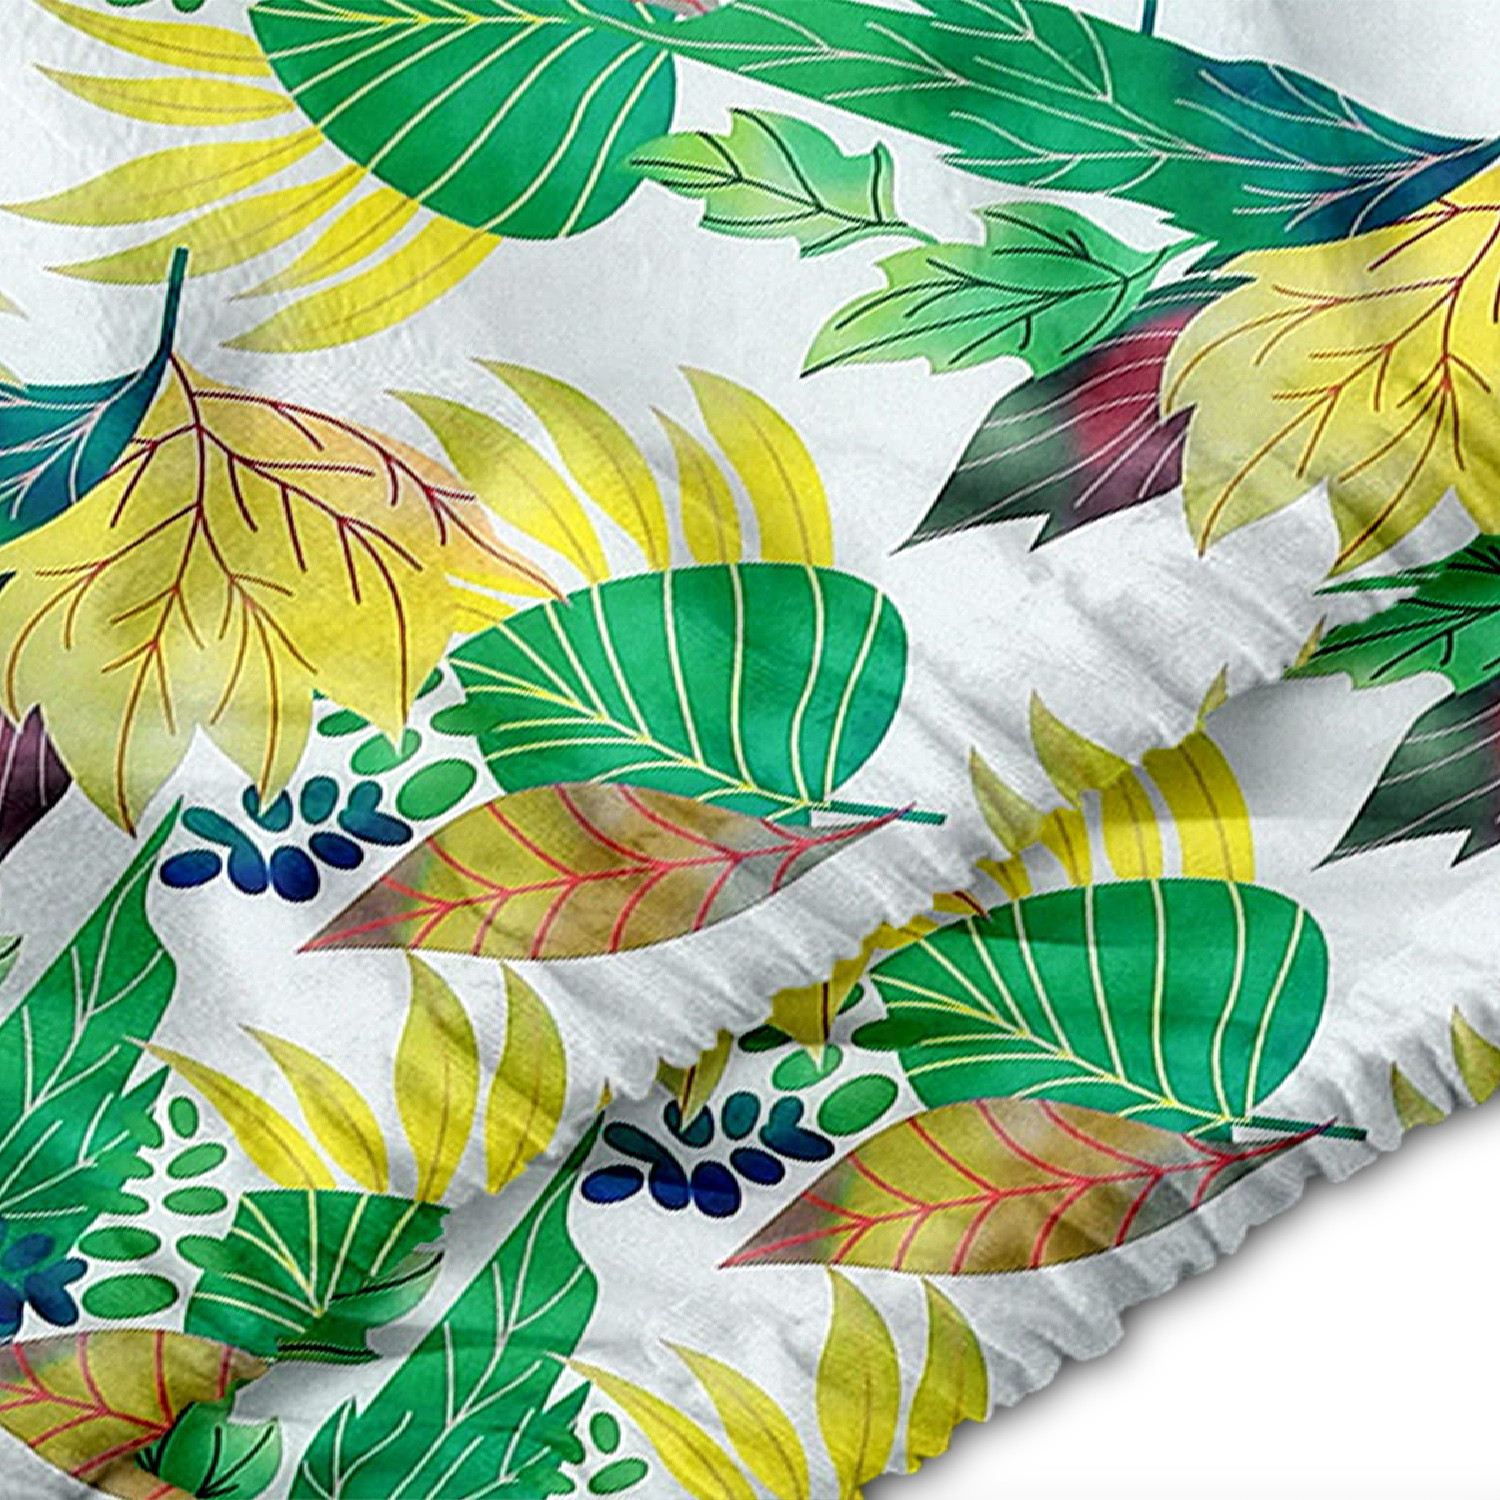 Kuber Industries AC Cover|Attractive Leaf Print 1.5 Ton|All Weather Friendly|Stretchable Fabric & Elastic Closure, (Green)